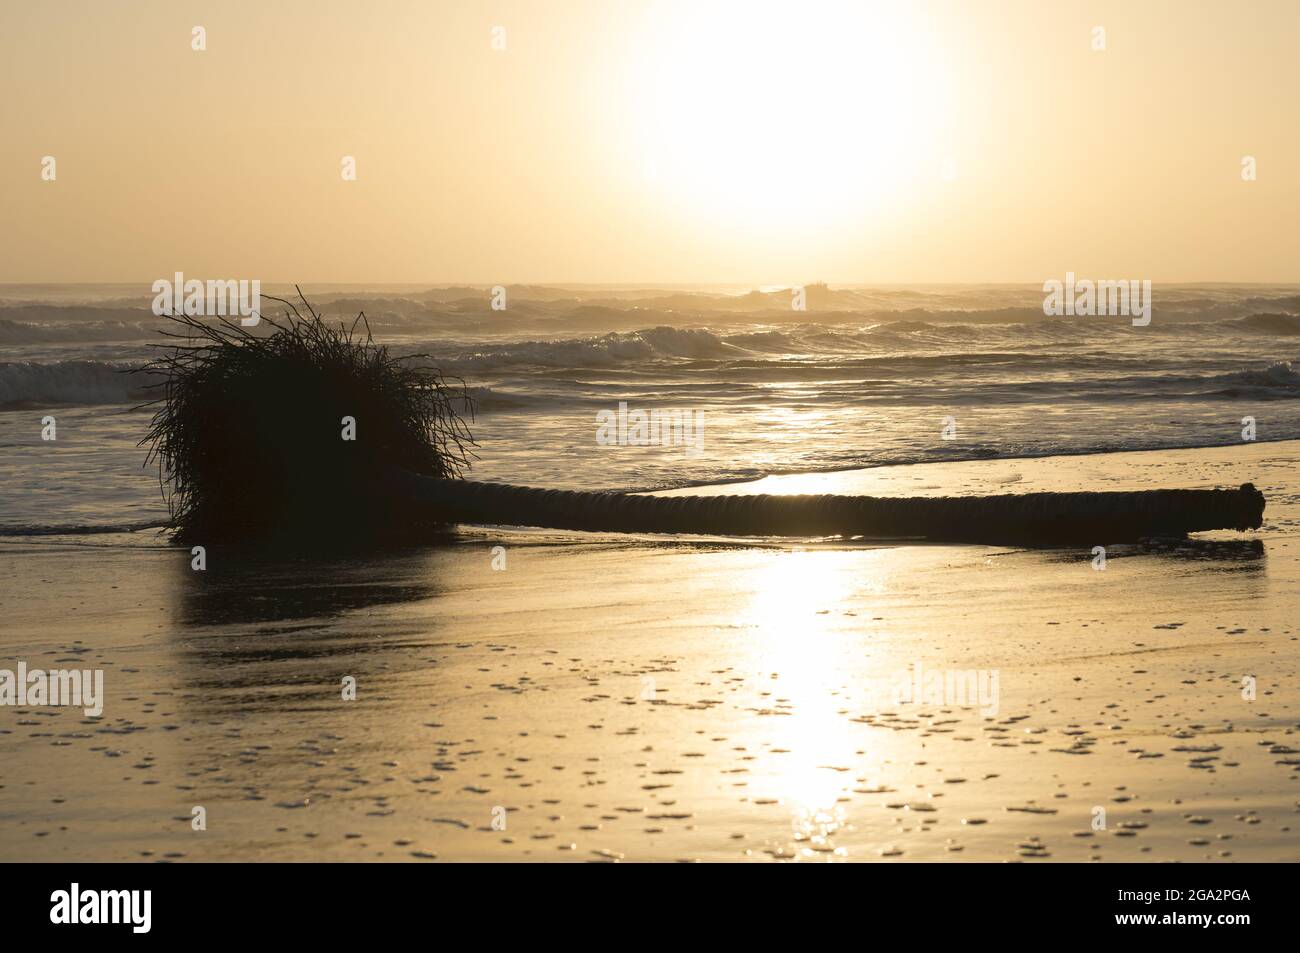 Sunrise over the Caribbean Sea on Costa Rica's eastern coastline with a silhouette of a fallen palm tree (Arecaceae) lying on the beach Stock Photo